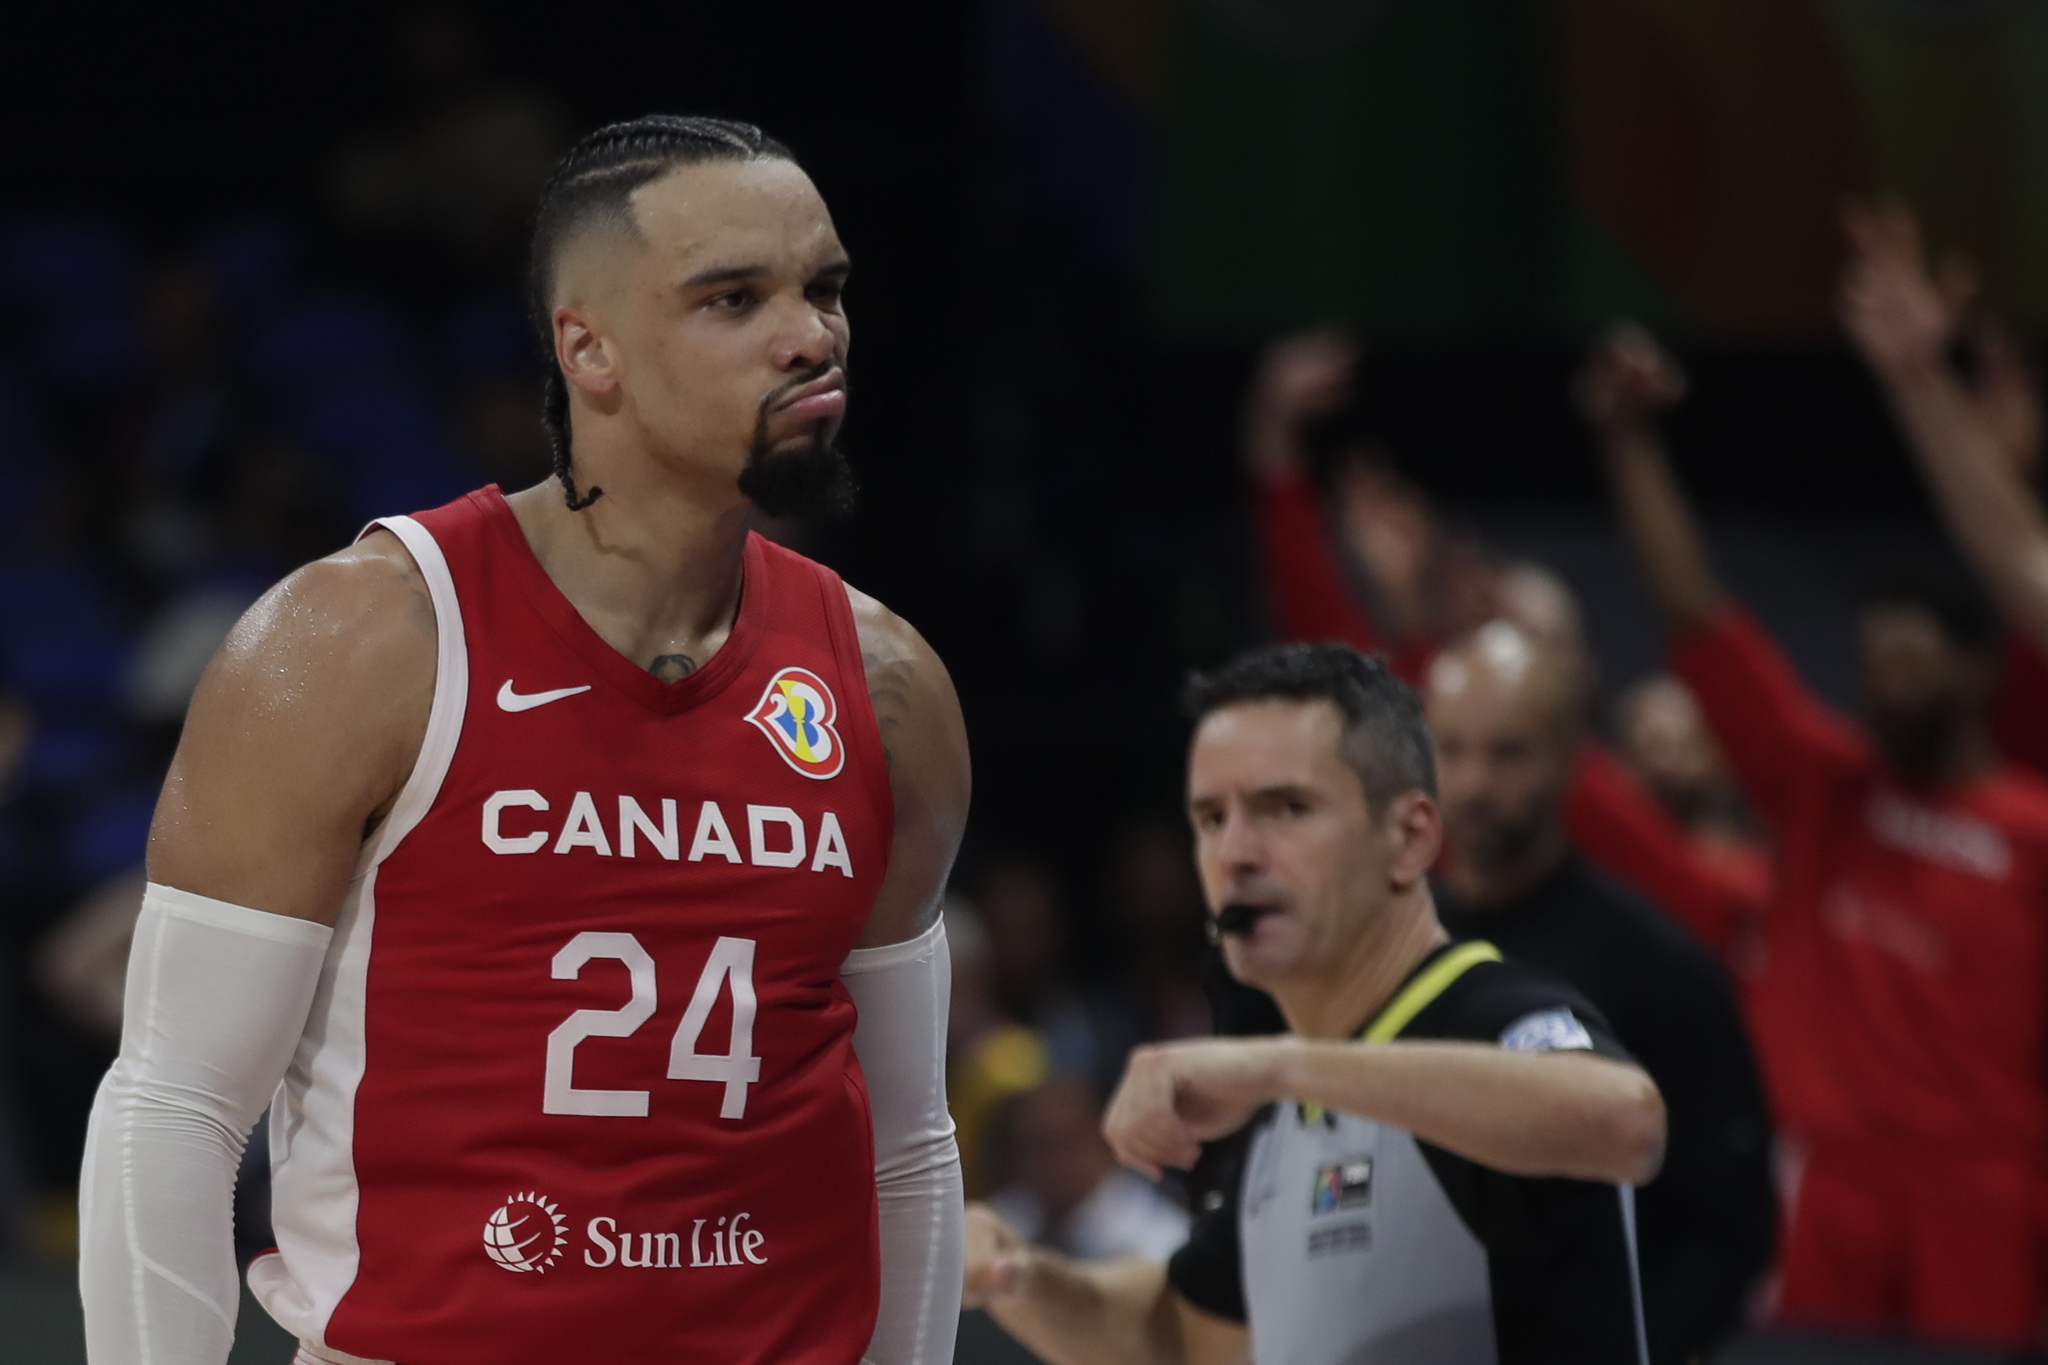 Dillon Brooks of Canada during the FIBA Basketball World Cup 2023